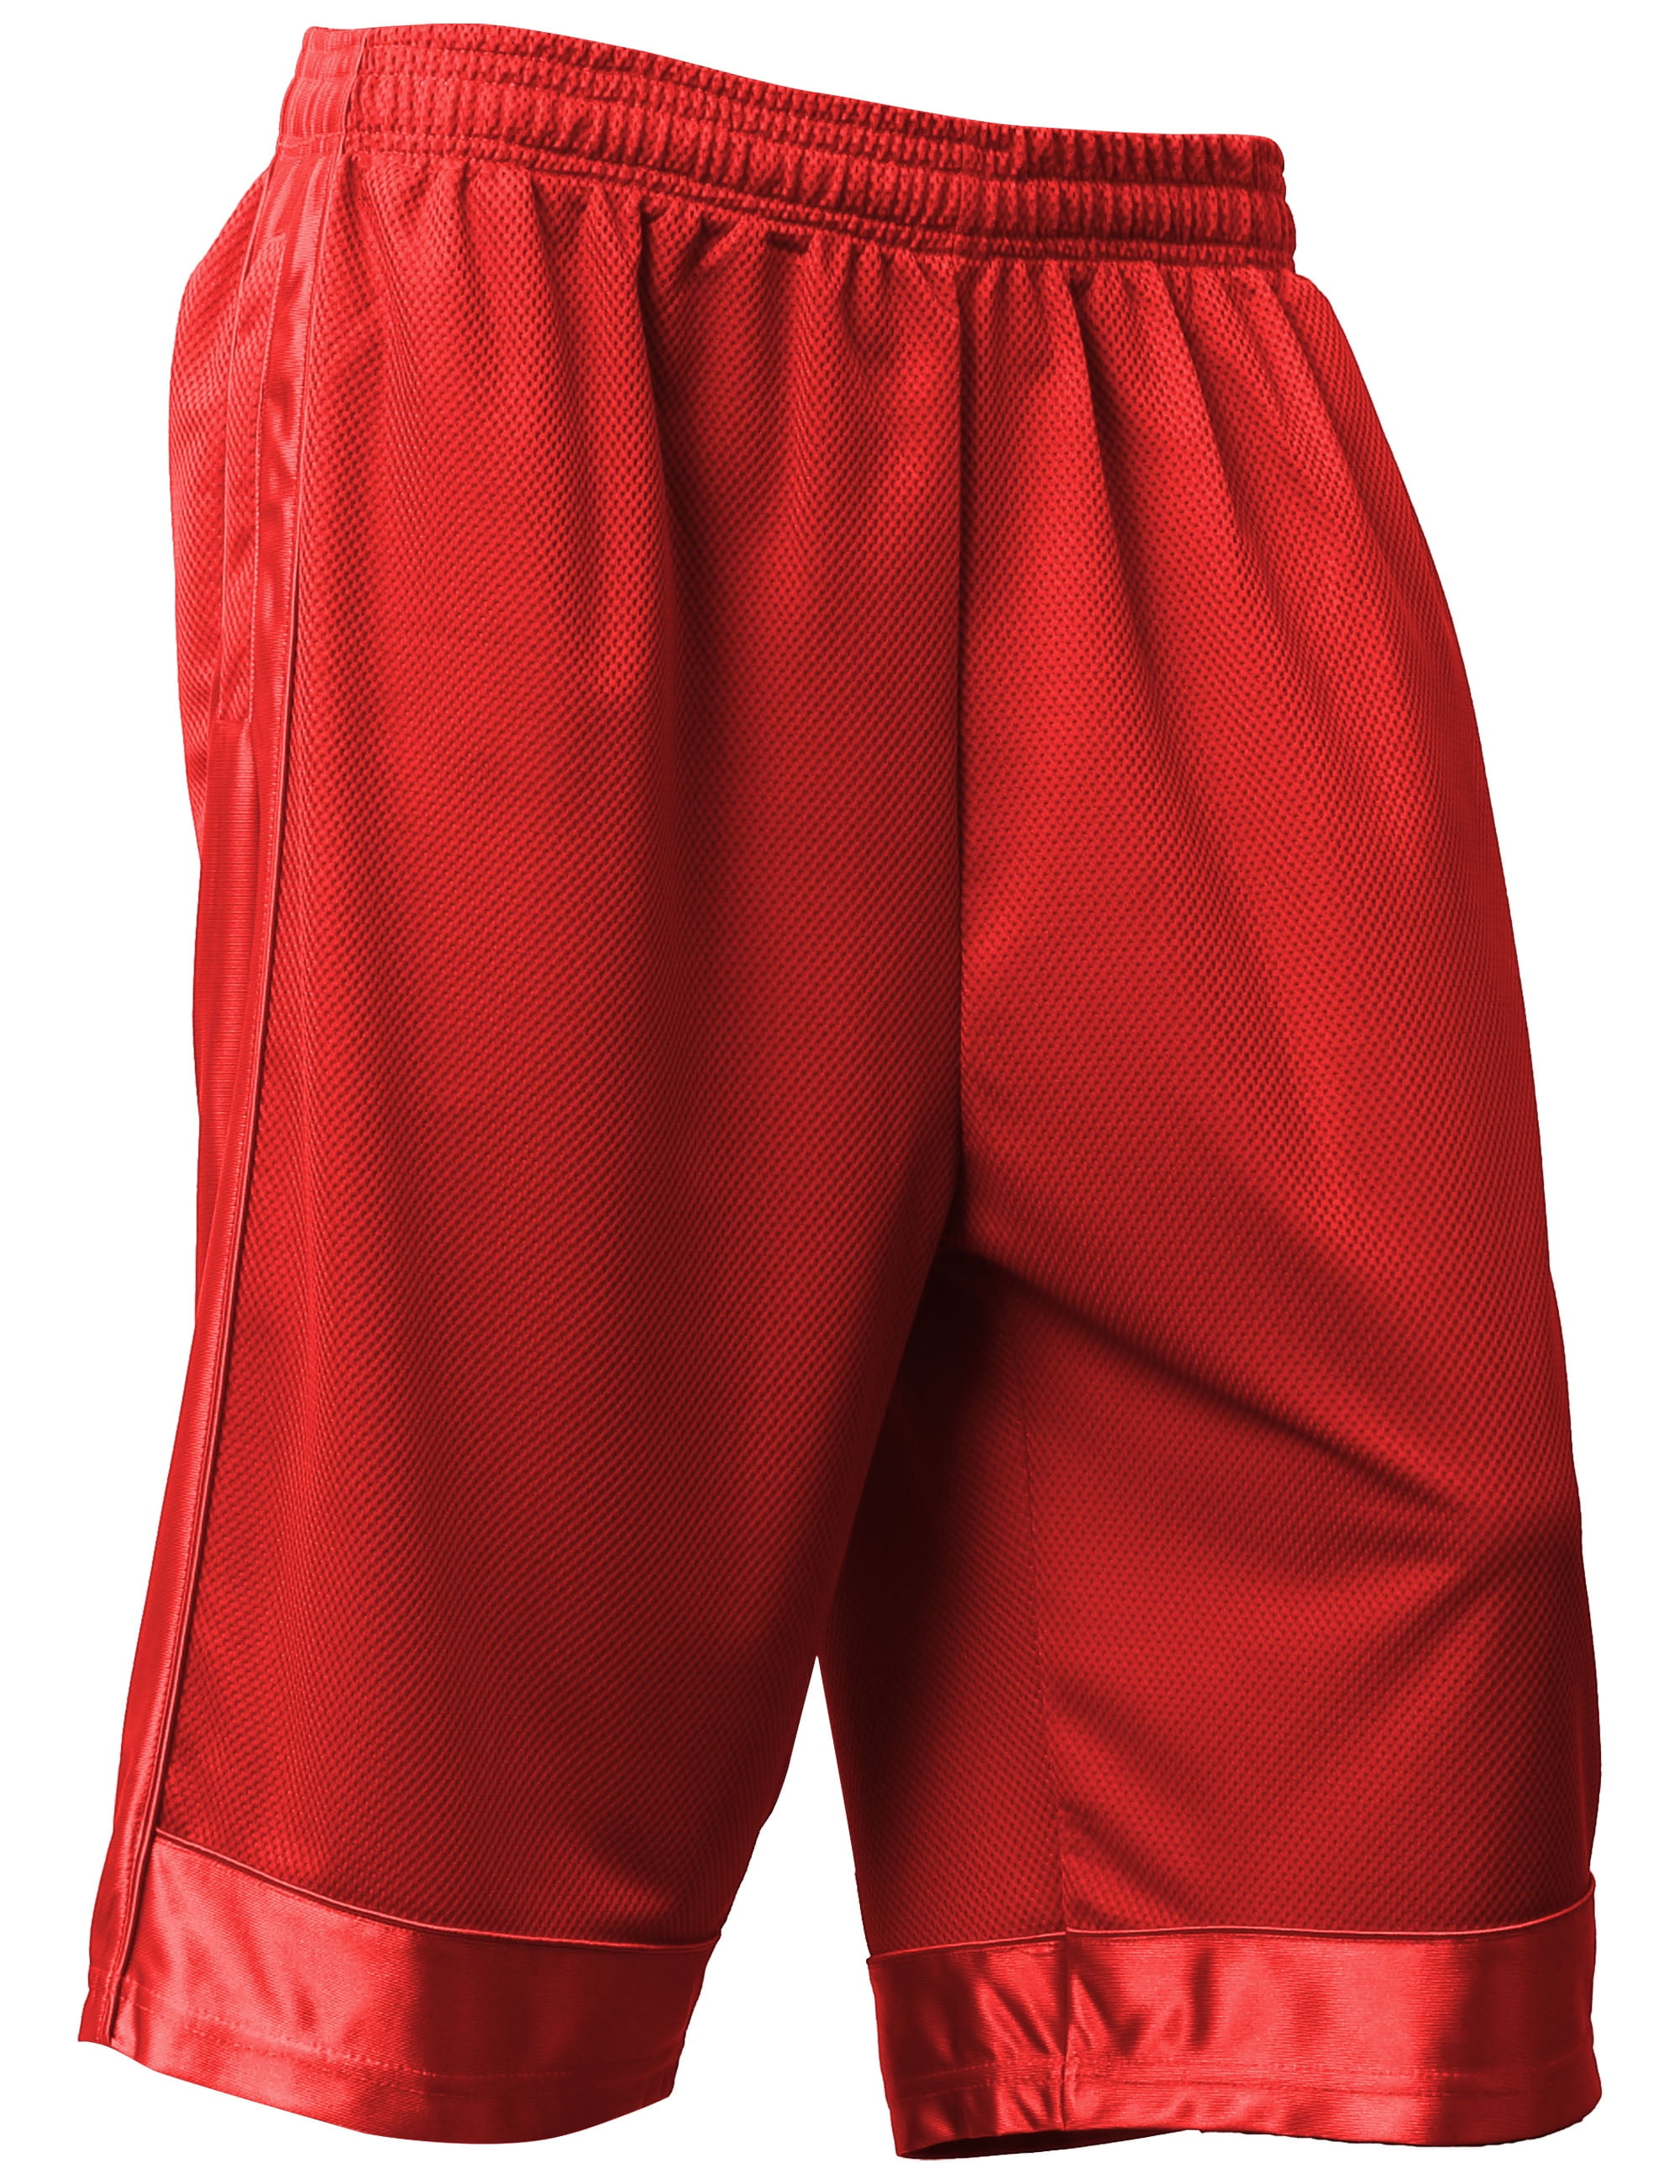 Buy > red mesh shorts > in stock